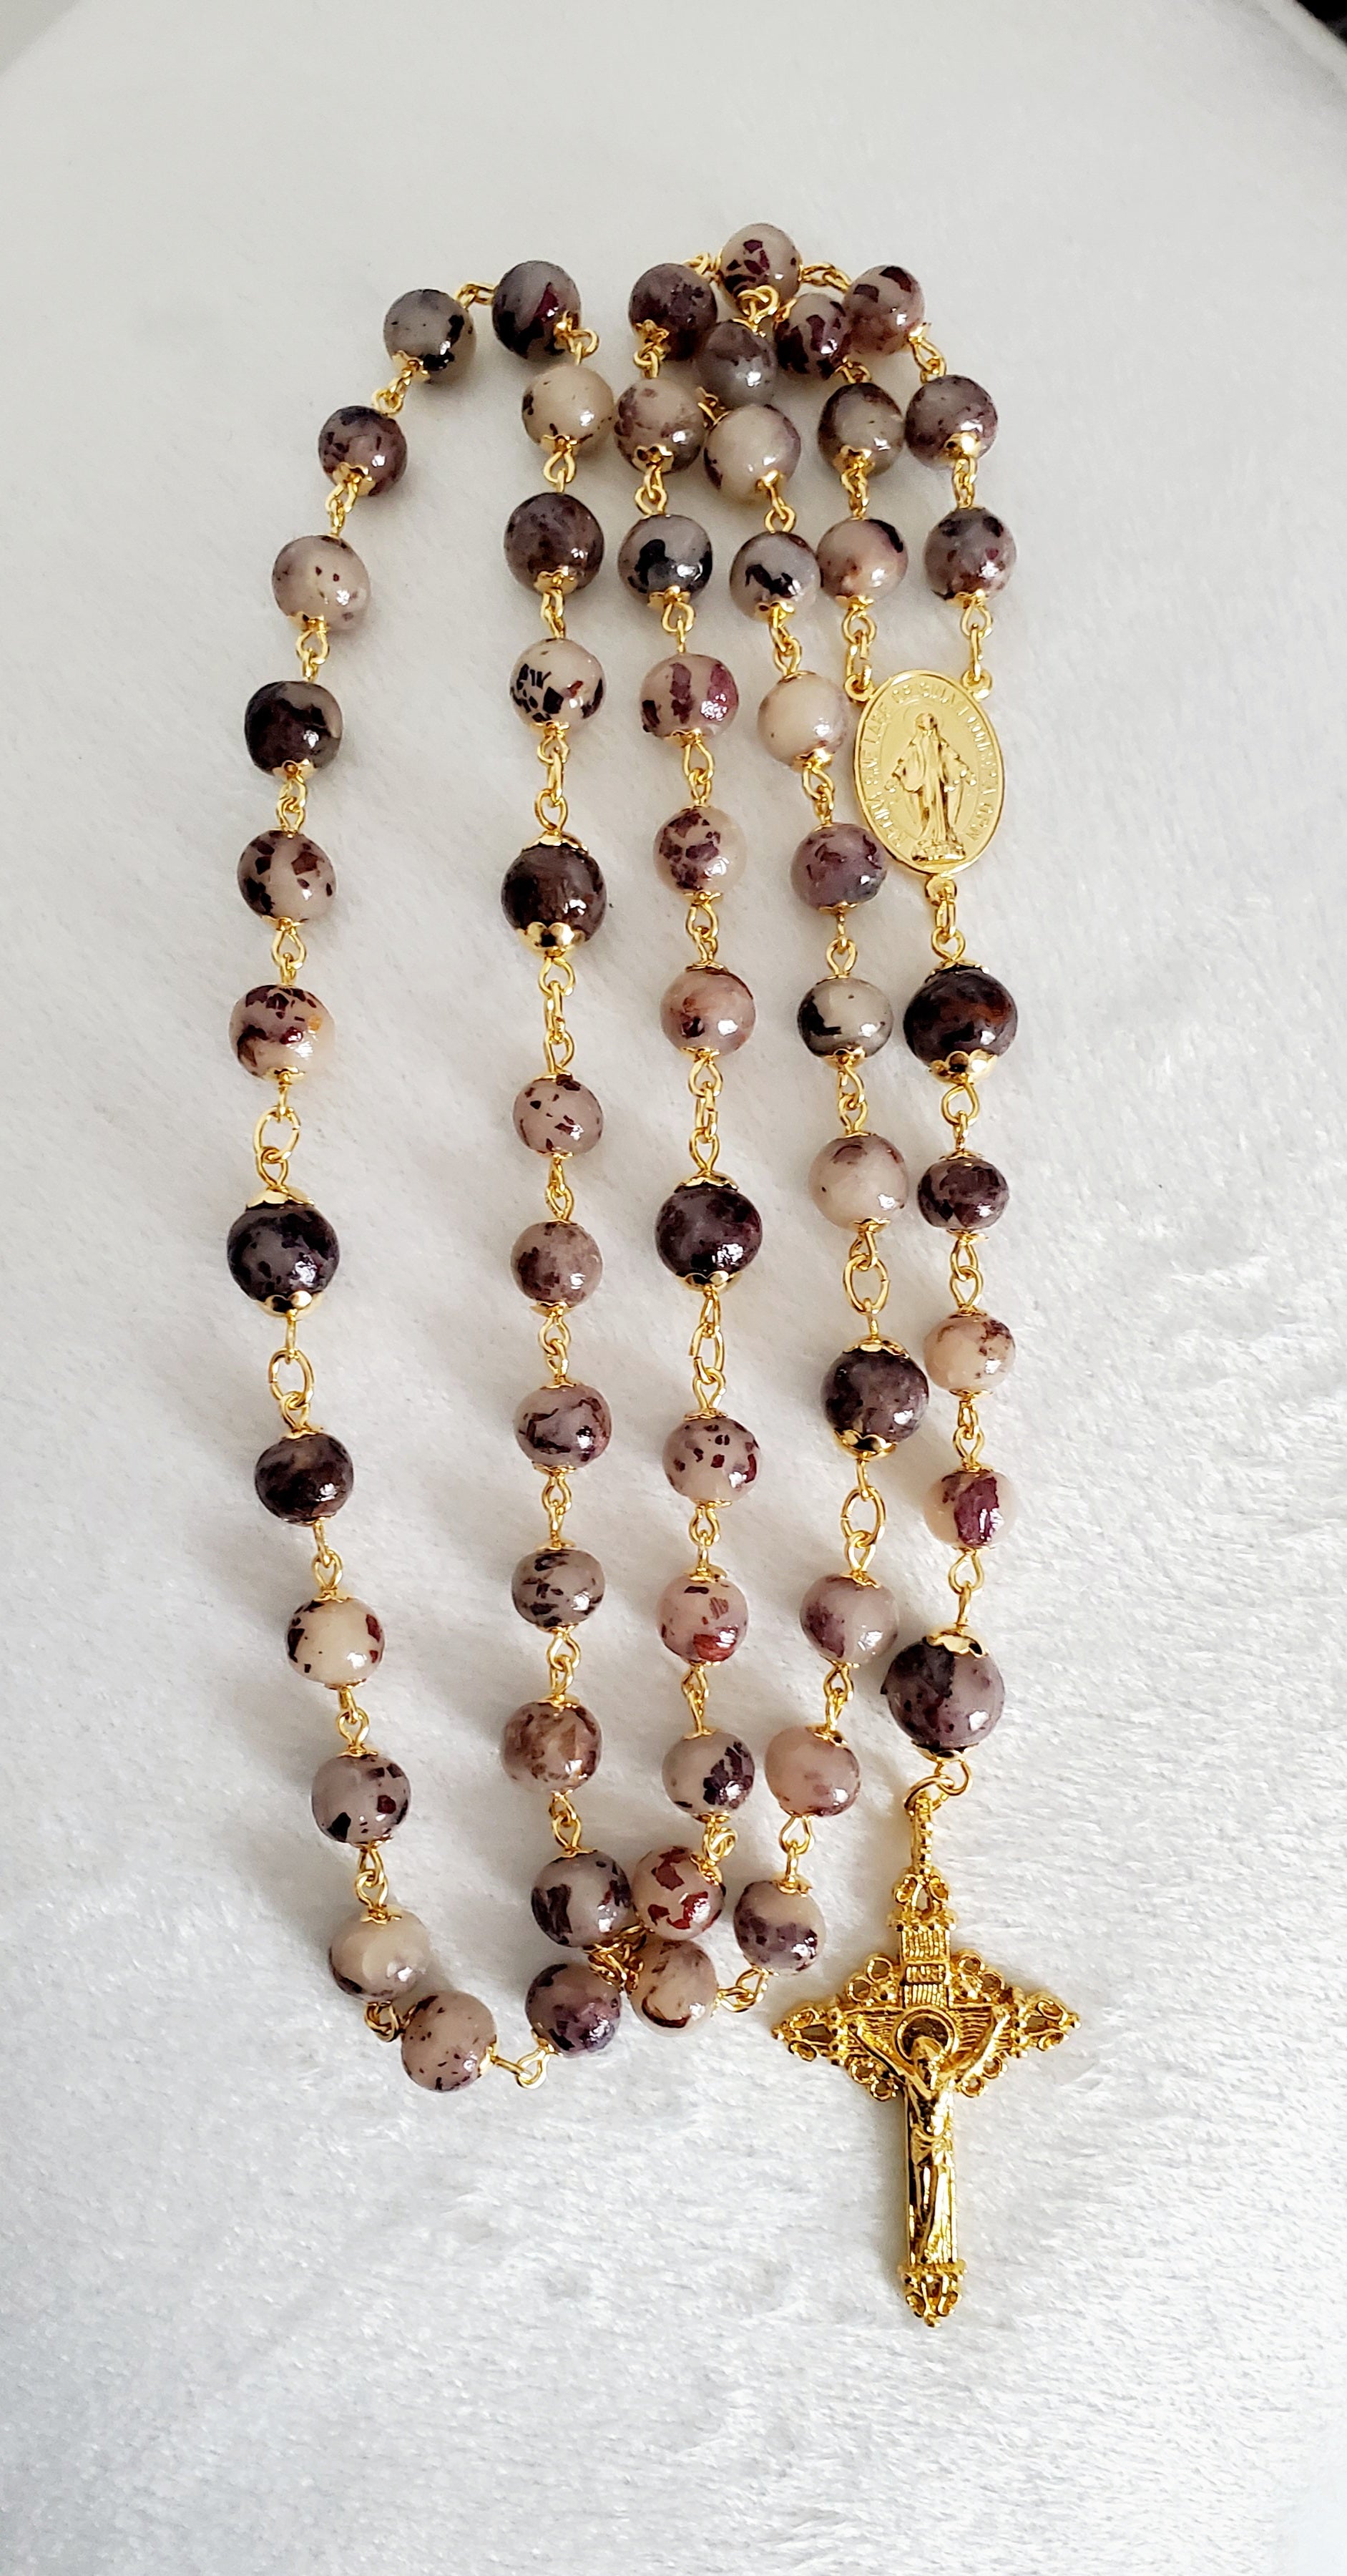 How to Make the Most Simple Beaded Rosary 